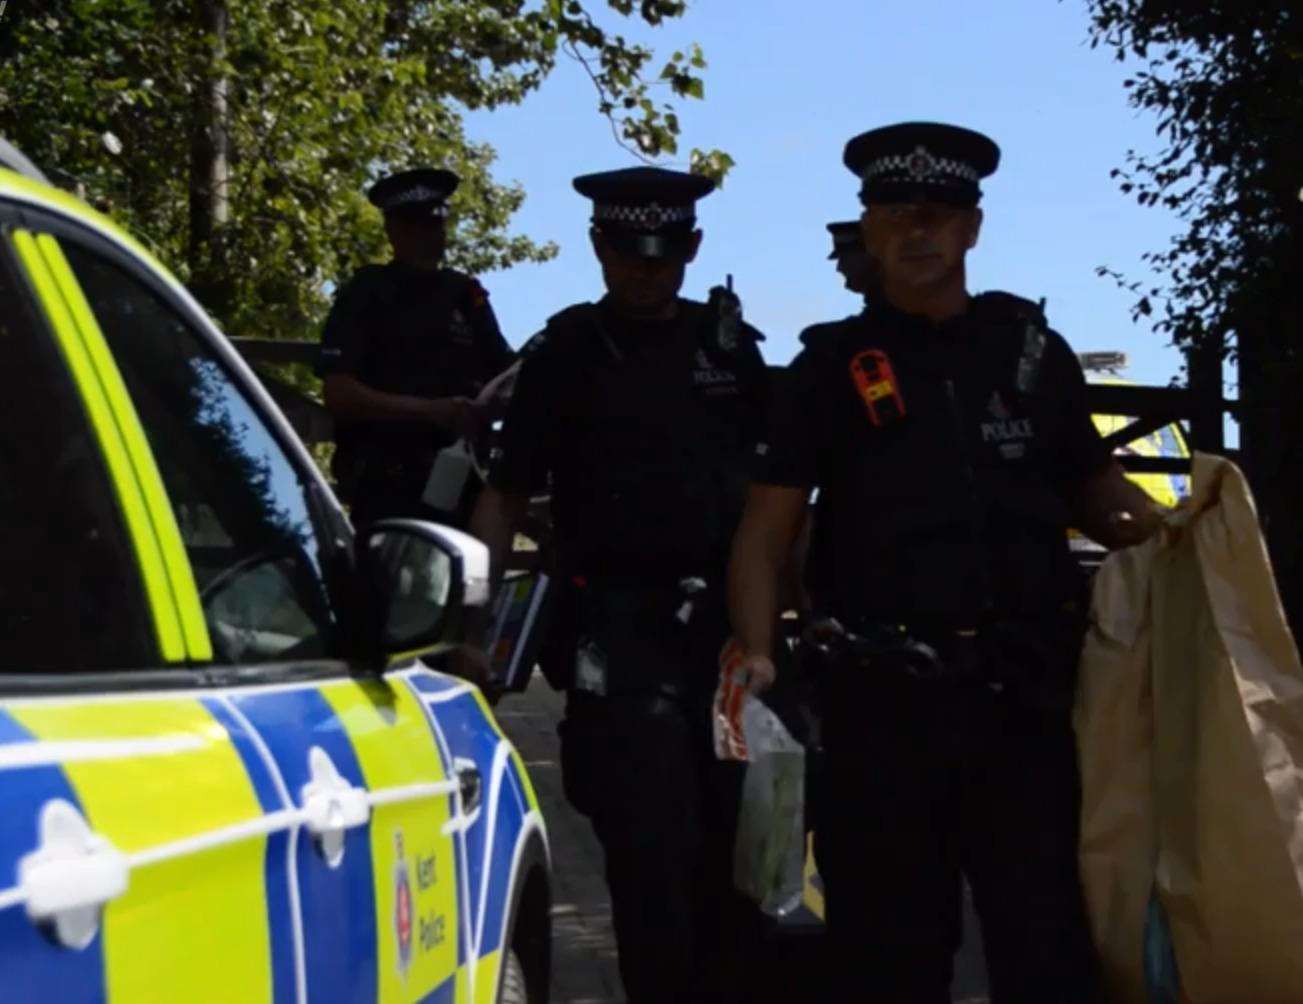 Police are cracking down on flytipping in Kent